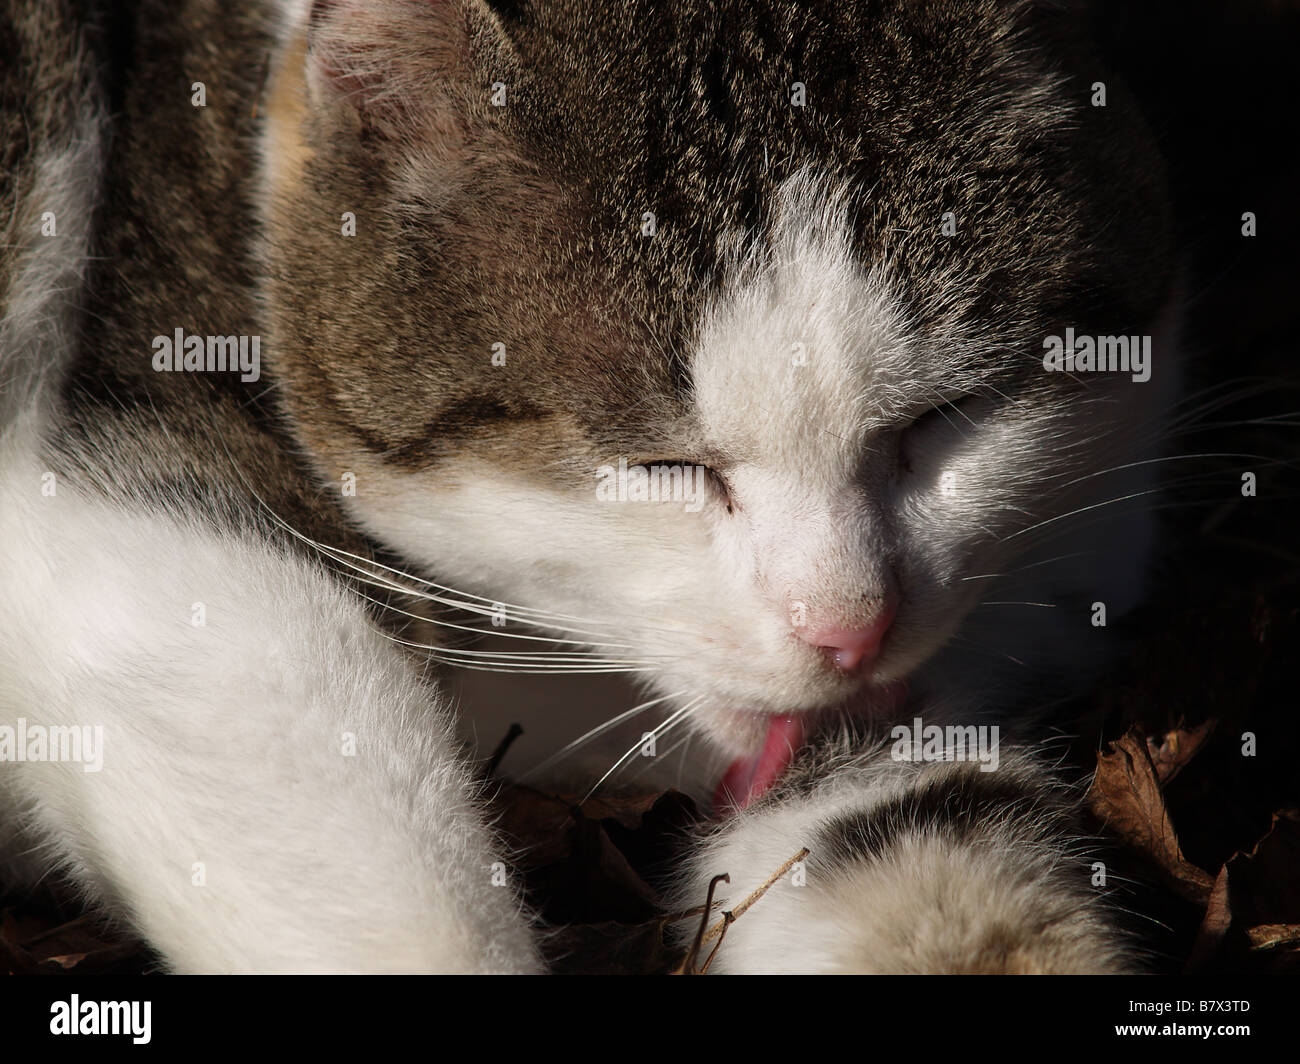 A cat cleaning itself Stock Photo